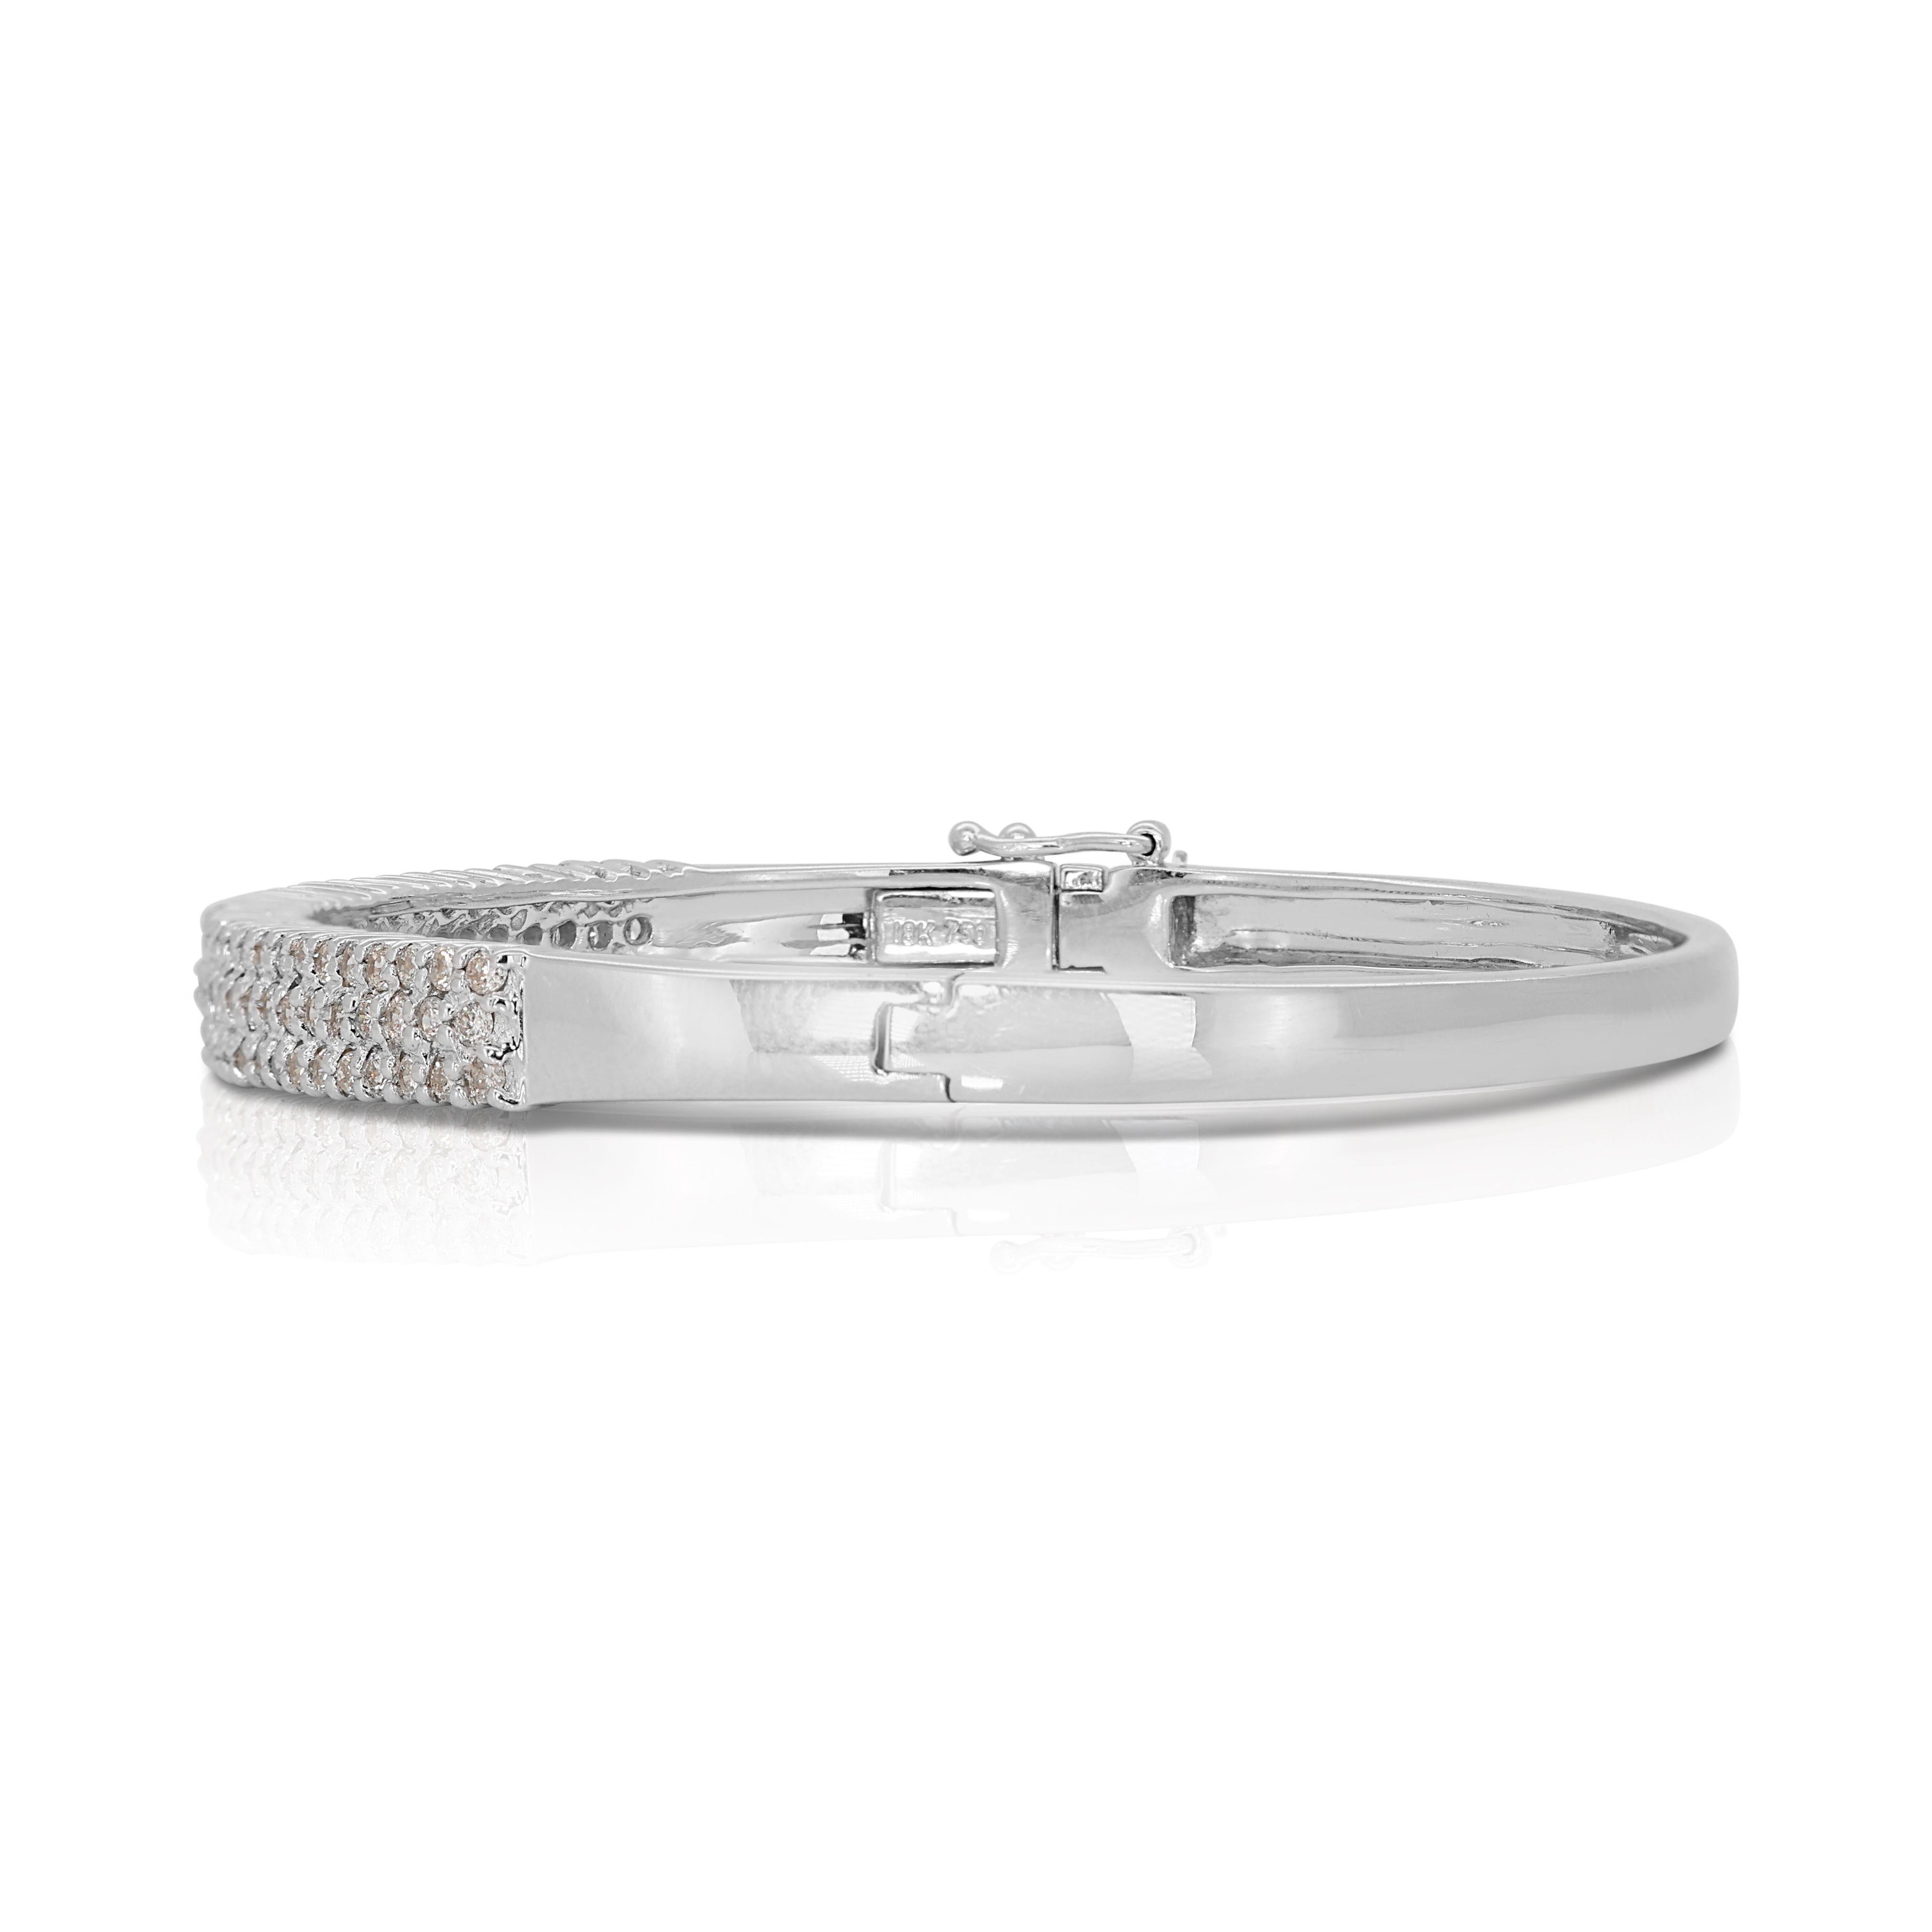 Stunning 1.08ct Round Brilliant Natural Diamond Bangle in 18K White Gold For Sale 1